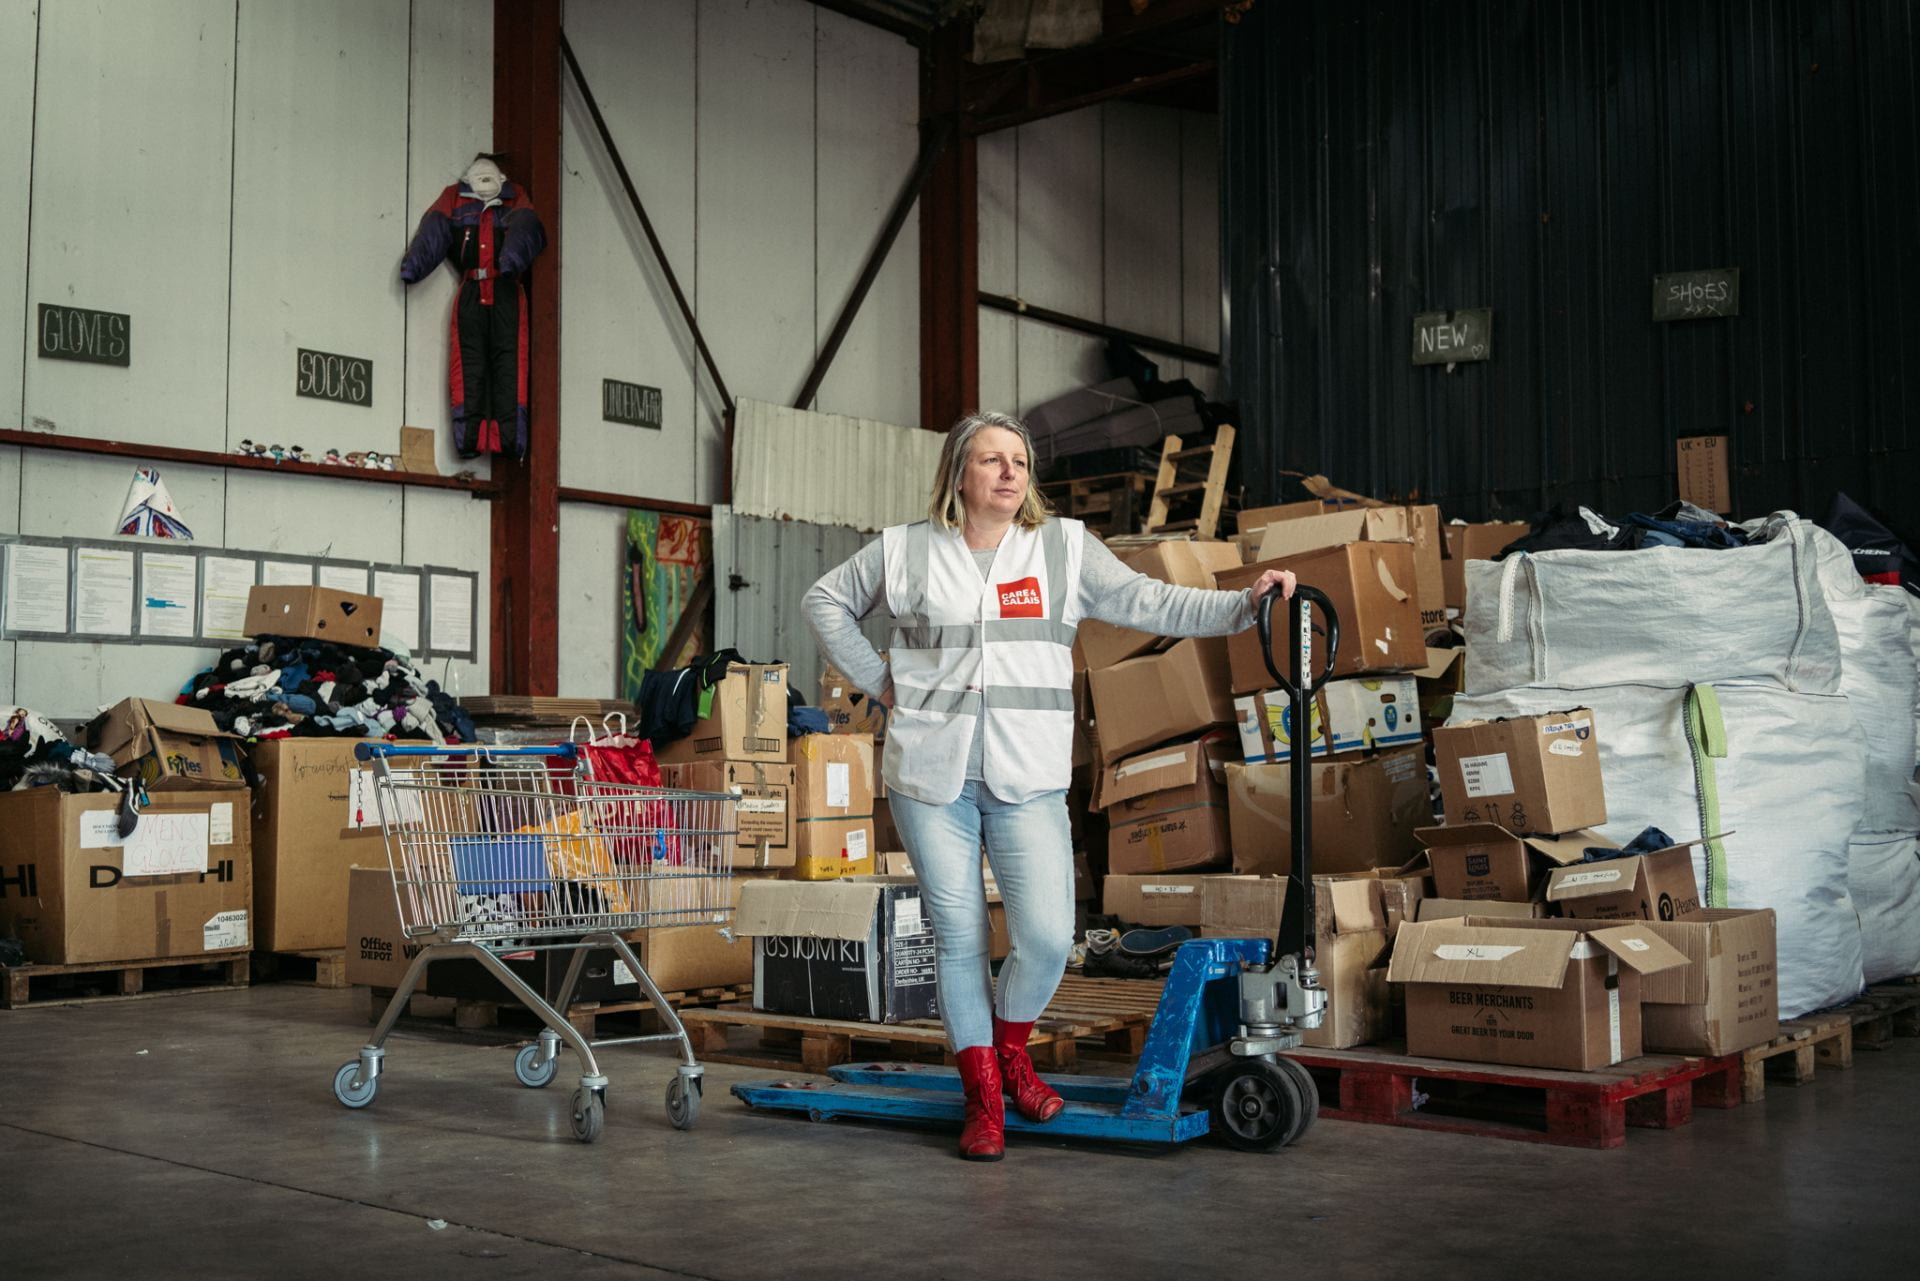 Volunteer with red shoes and off-white high visibility jacket standing next to a trolley, inside warehouse full of cardboard boxes containing clothes.